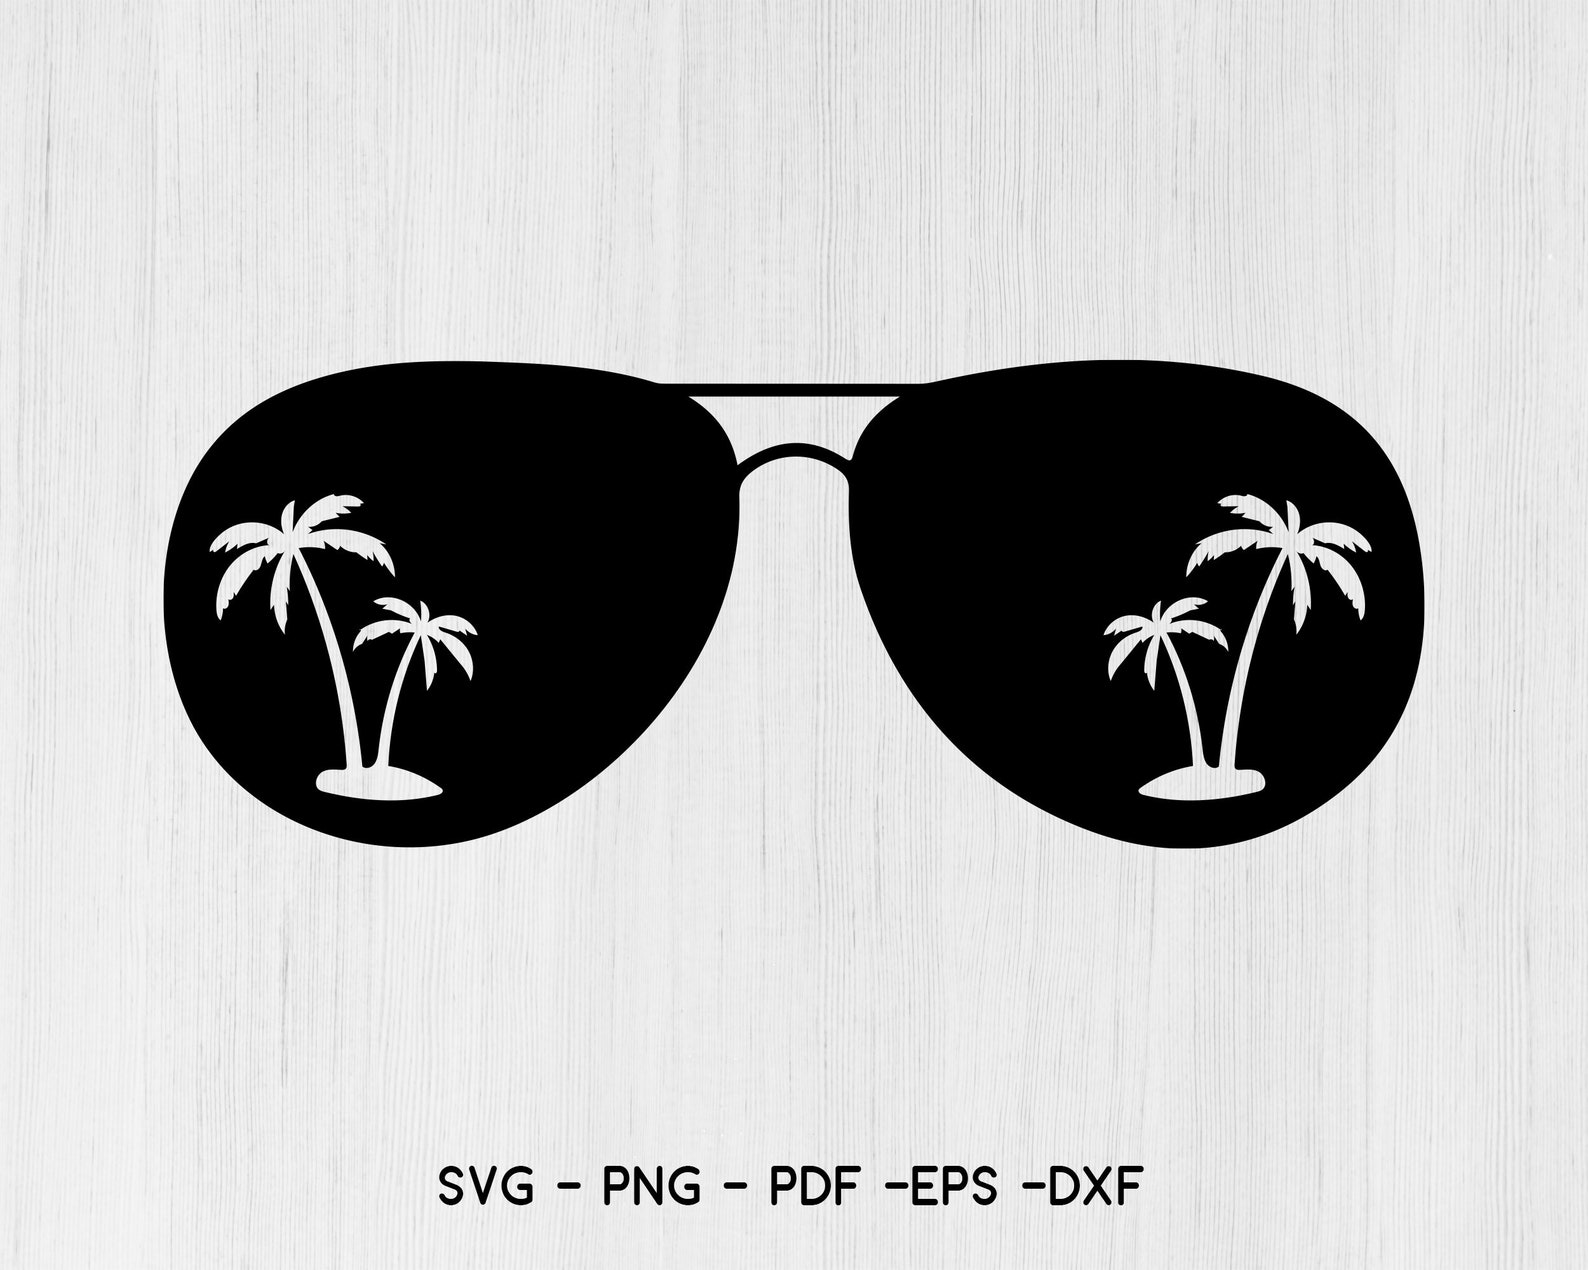 Sunglasses With Palm Trees Svg Beach Summer Svg Svg Files Instant Download Cricut Cut Files